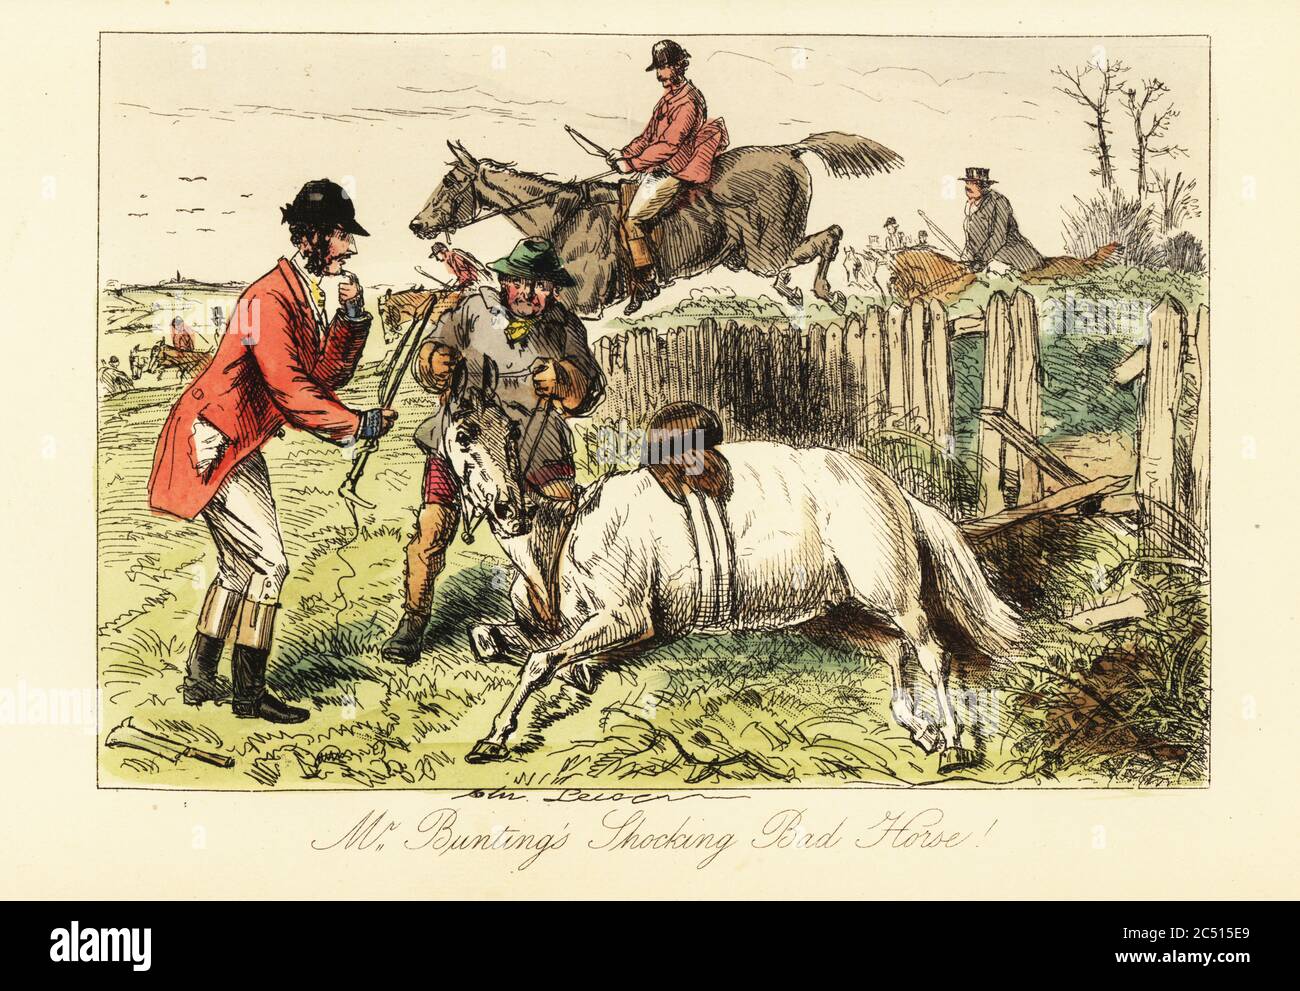 English gentleman with his fallen horse during a fox hunt, 19th century. Jack Bunting and a woodman in smock and boots try to raise the sick horse. Mr Bunting’s shocking bad horse. Handcoloured steel engraving after an illustration by John Leech from Robert Smith Surtees’ Plain or Ringlets?, Bradbury and Evans London, 1860. Leech (1817-1864) was an English caricaturist and illustrator best known for his work for Punch magazine. Stock Photo